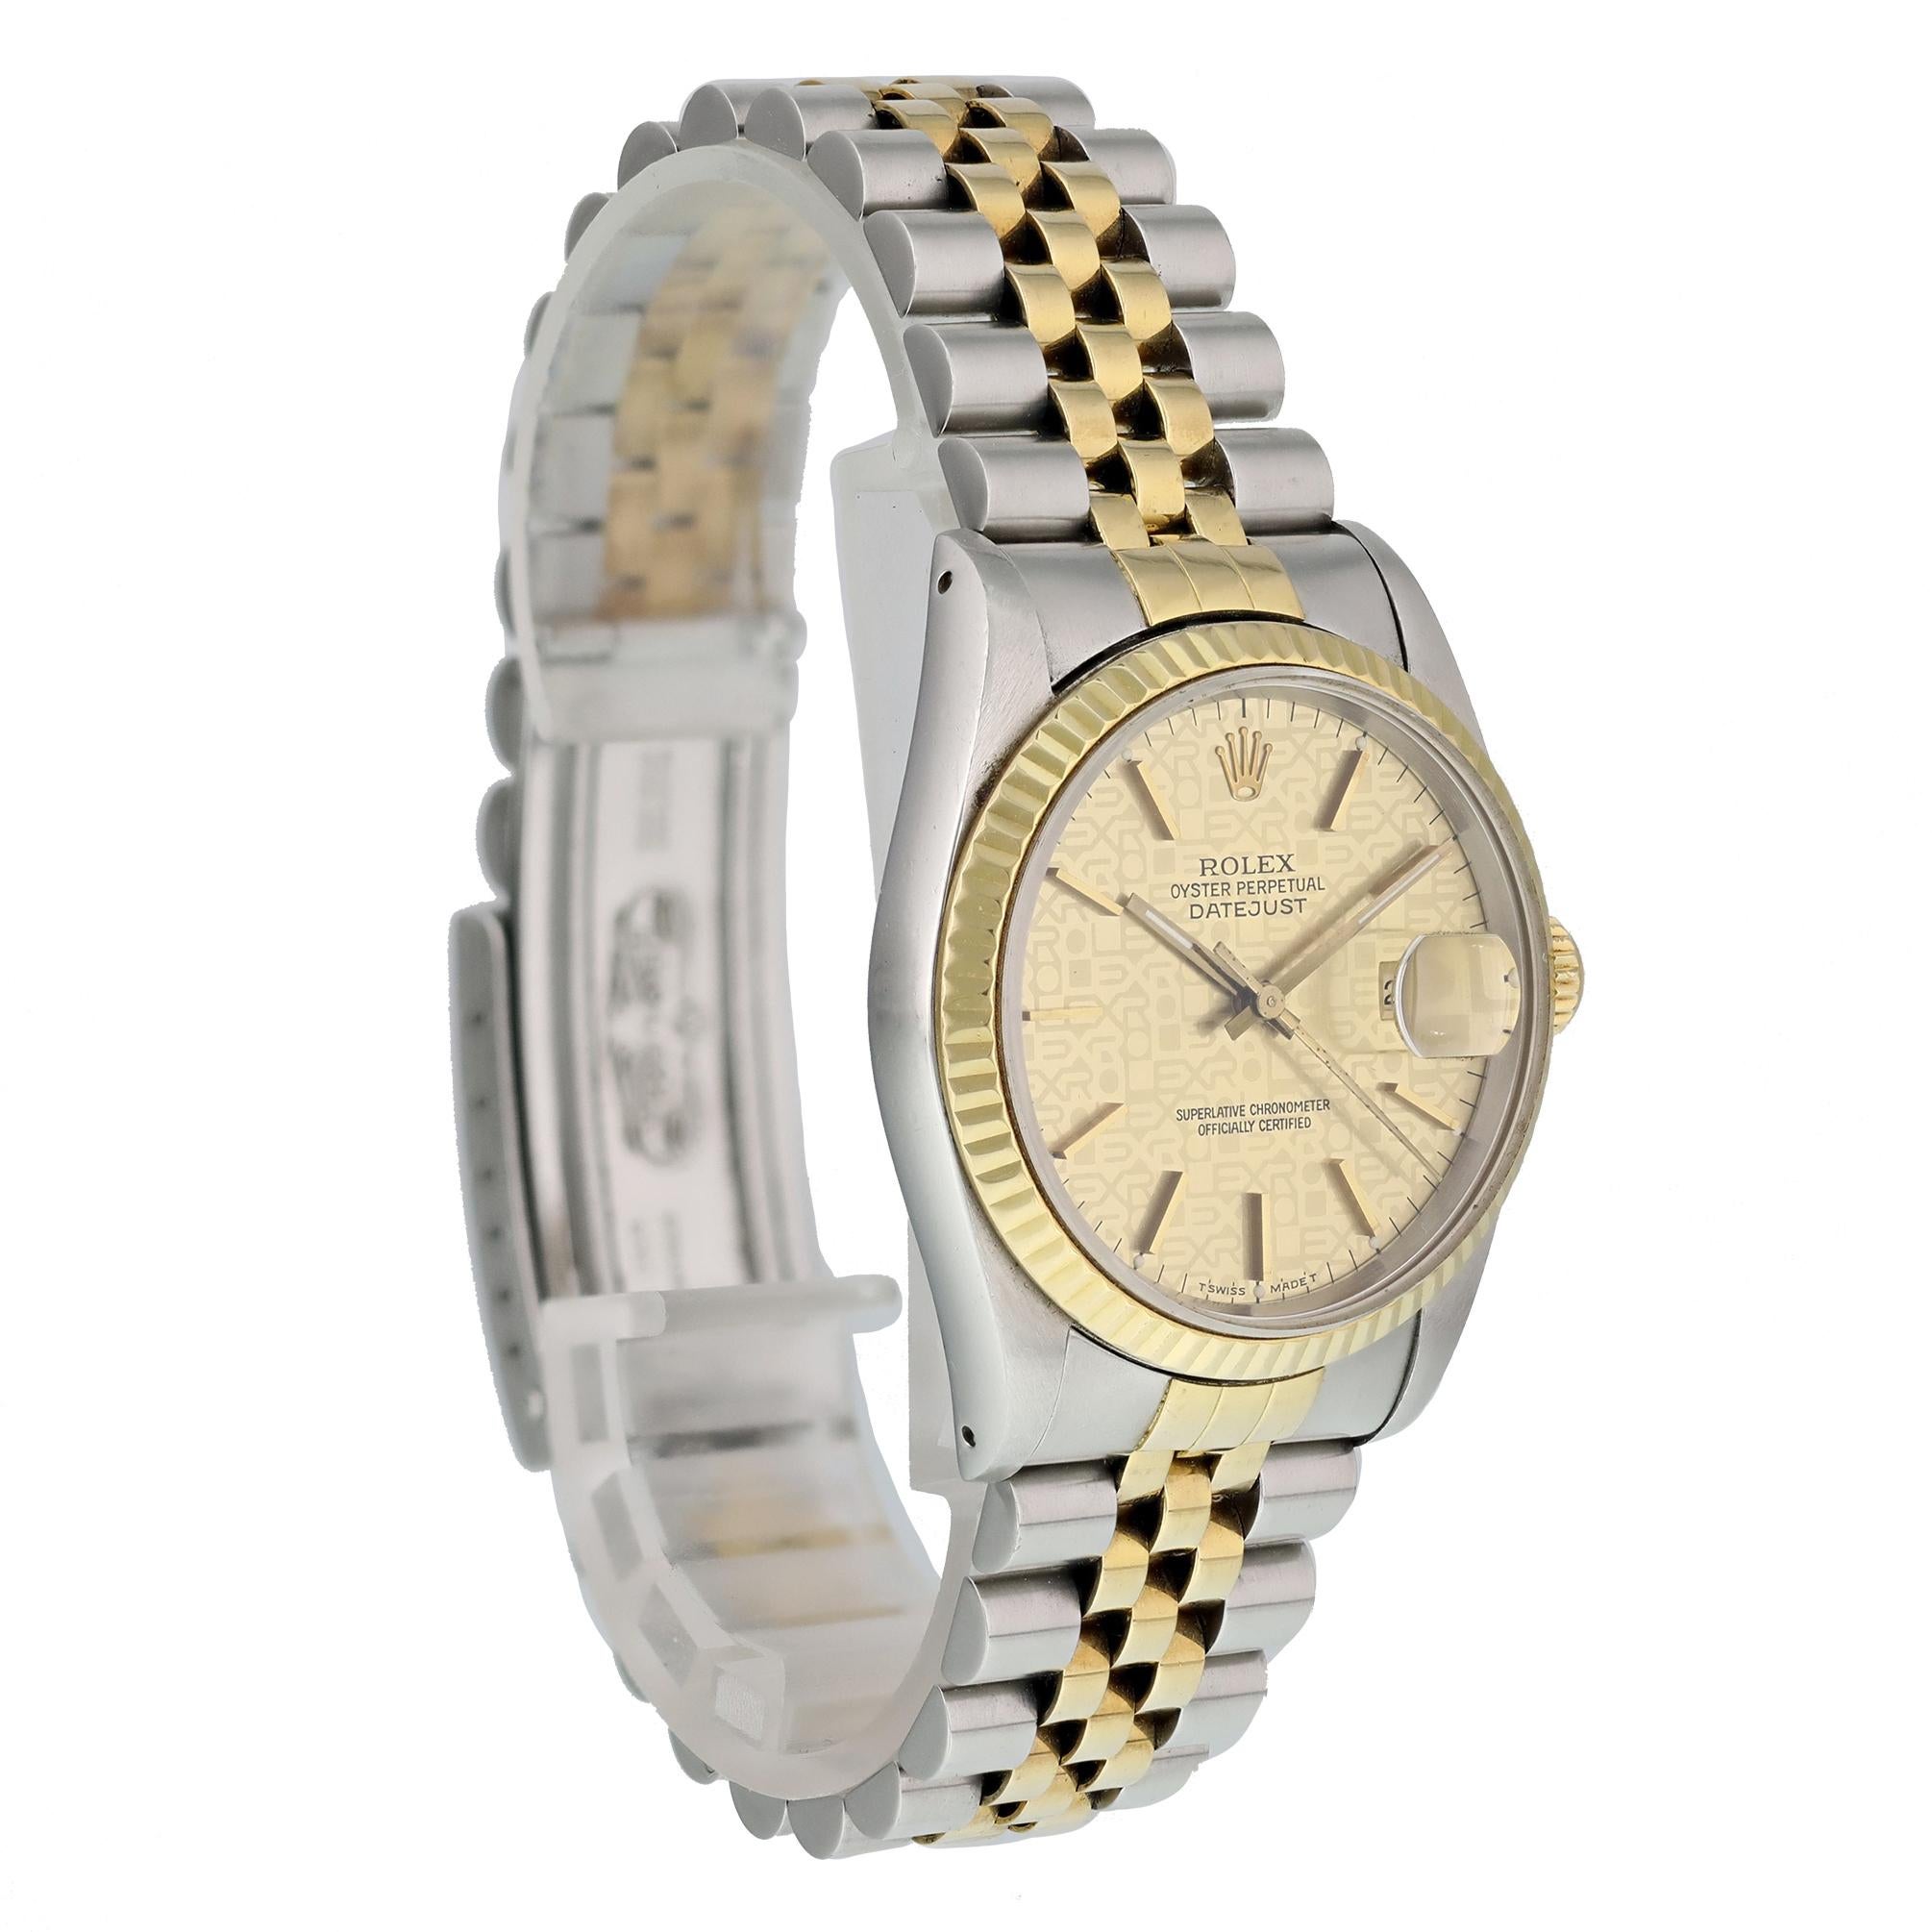 Rolex Datejust 16233 Champagne Jubilee Dial Men's Watch In Excellent Condition For Sale In New York, NY